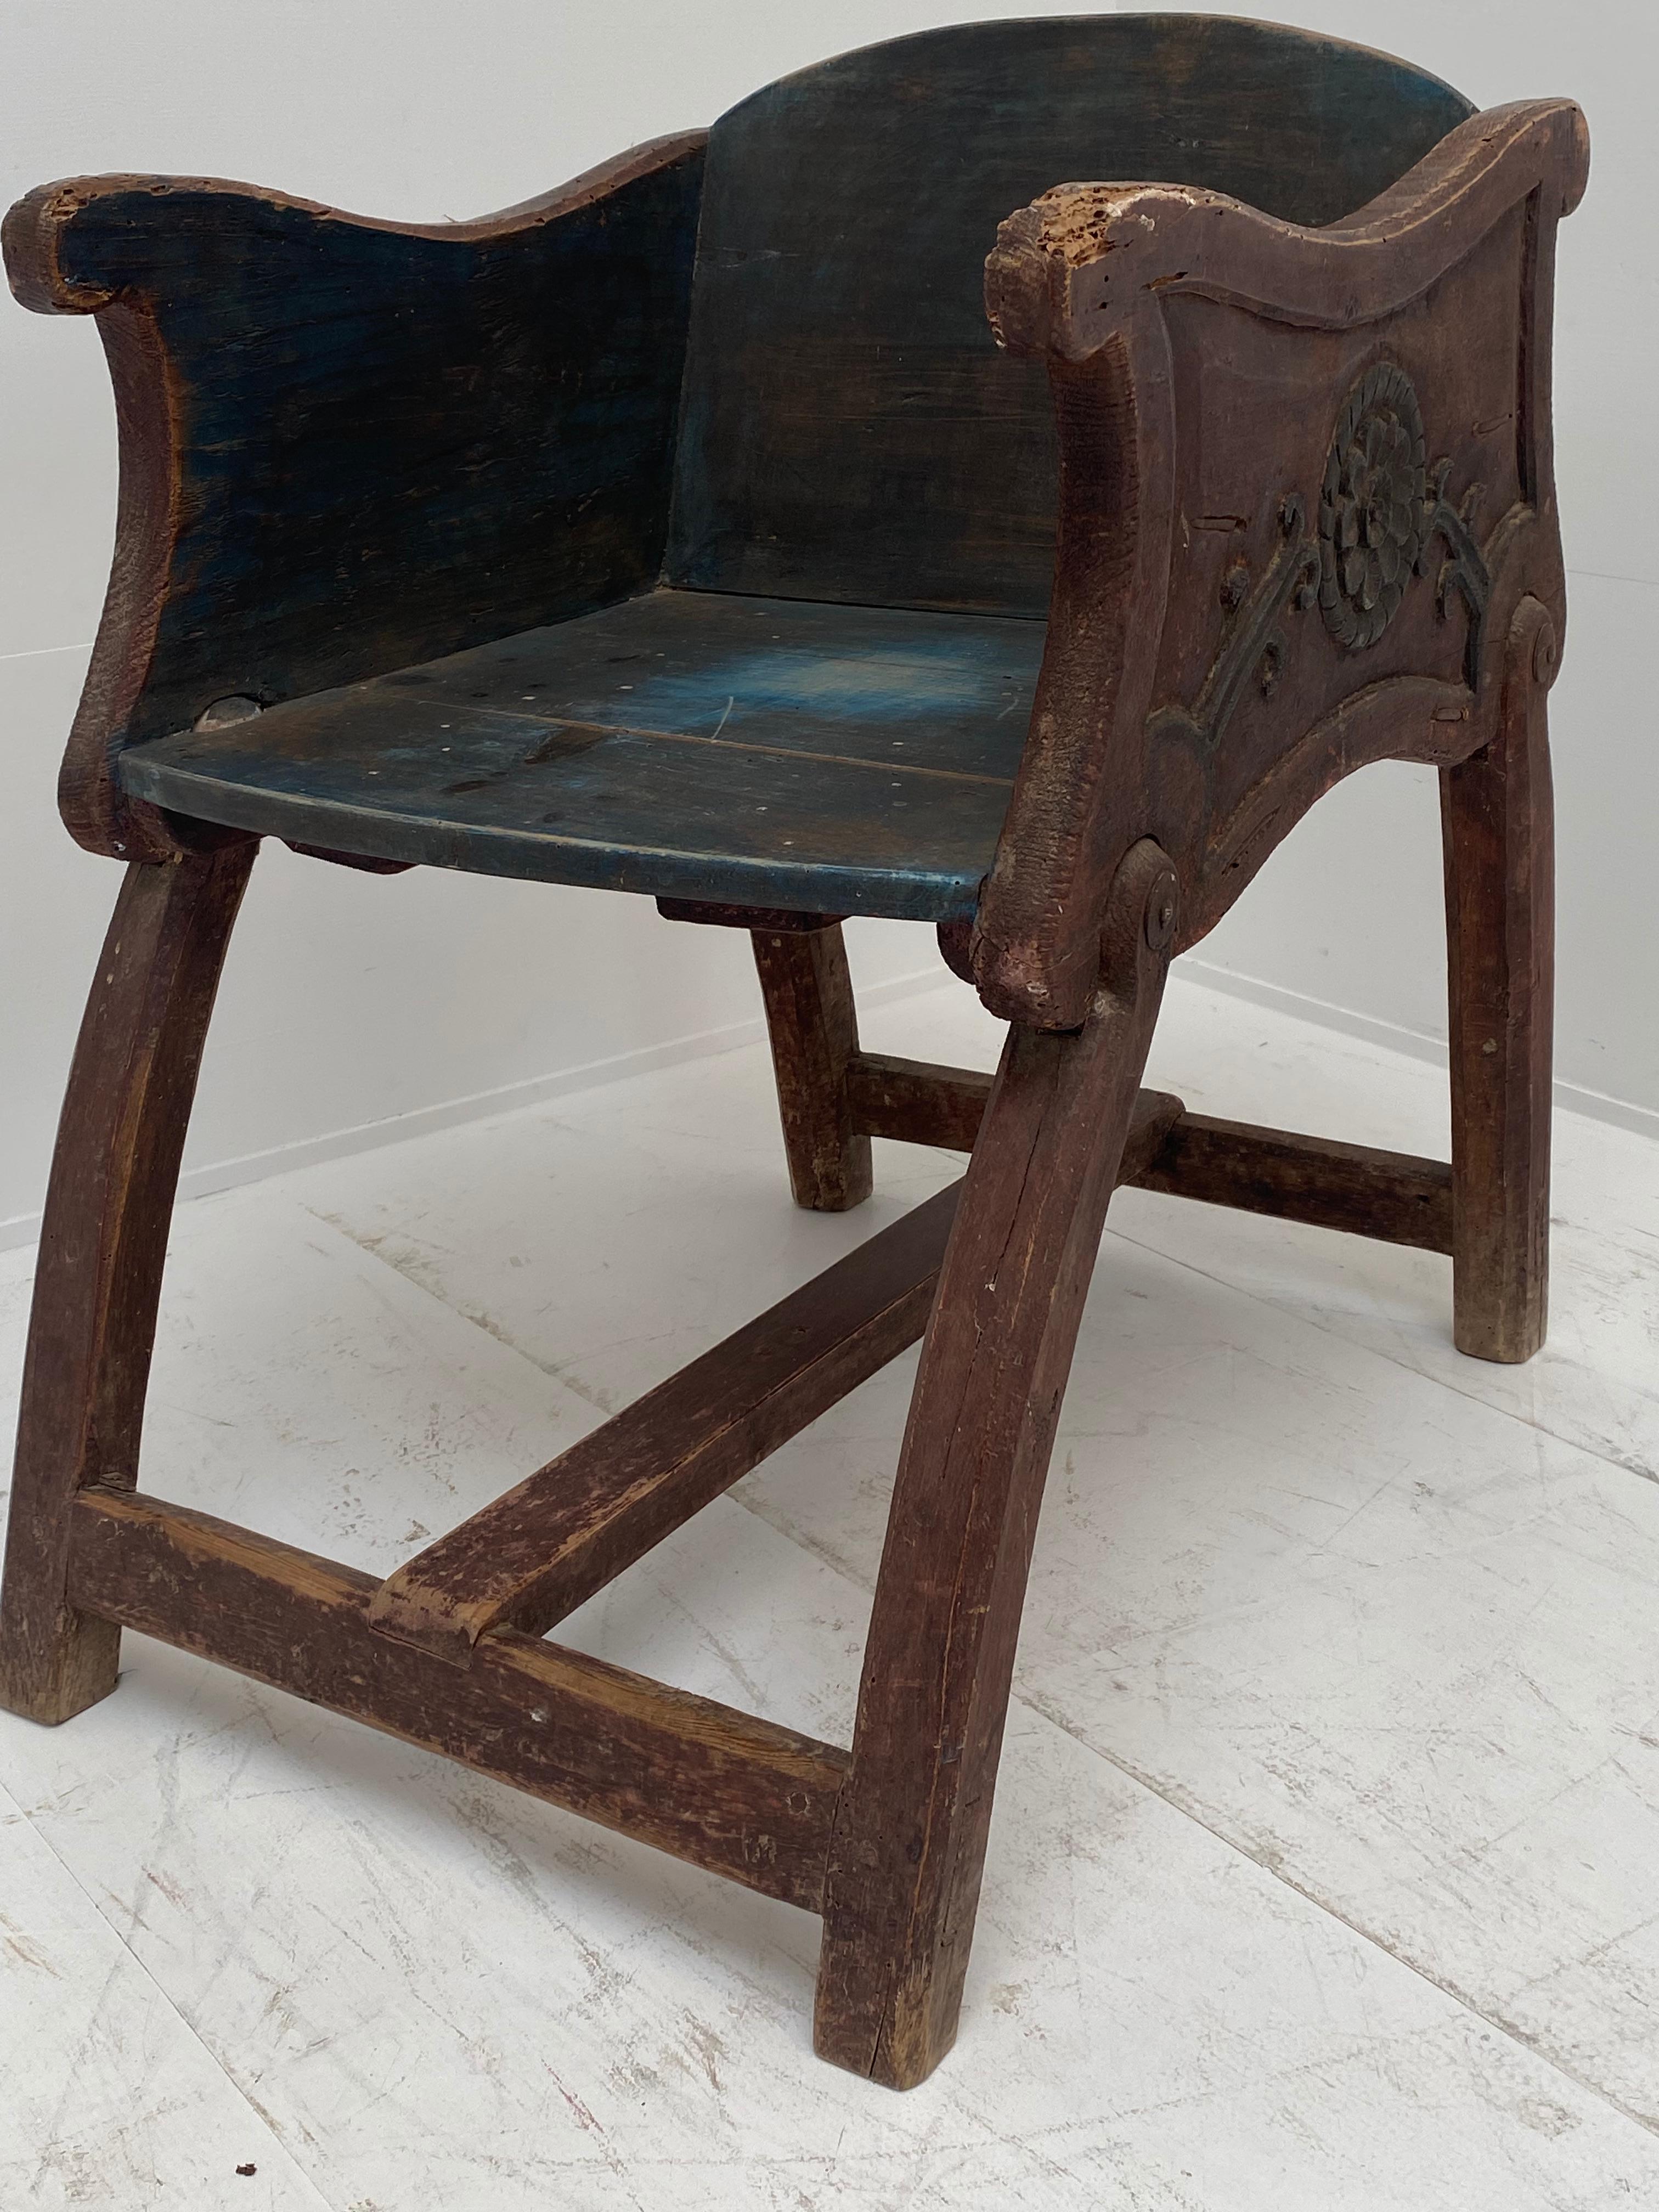 19th Century Antique Movable Brown/Blue Patinated Wooden Childs Stool, Spain For Sale